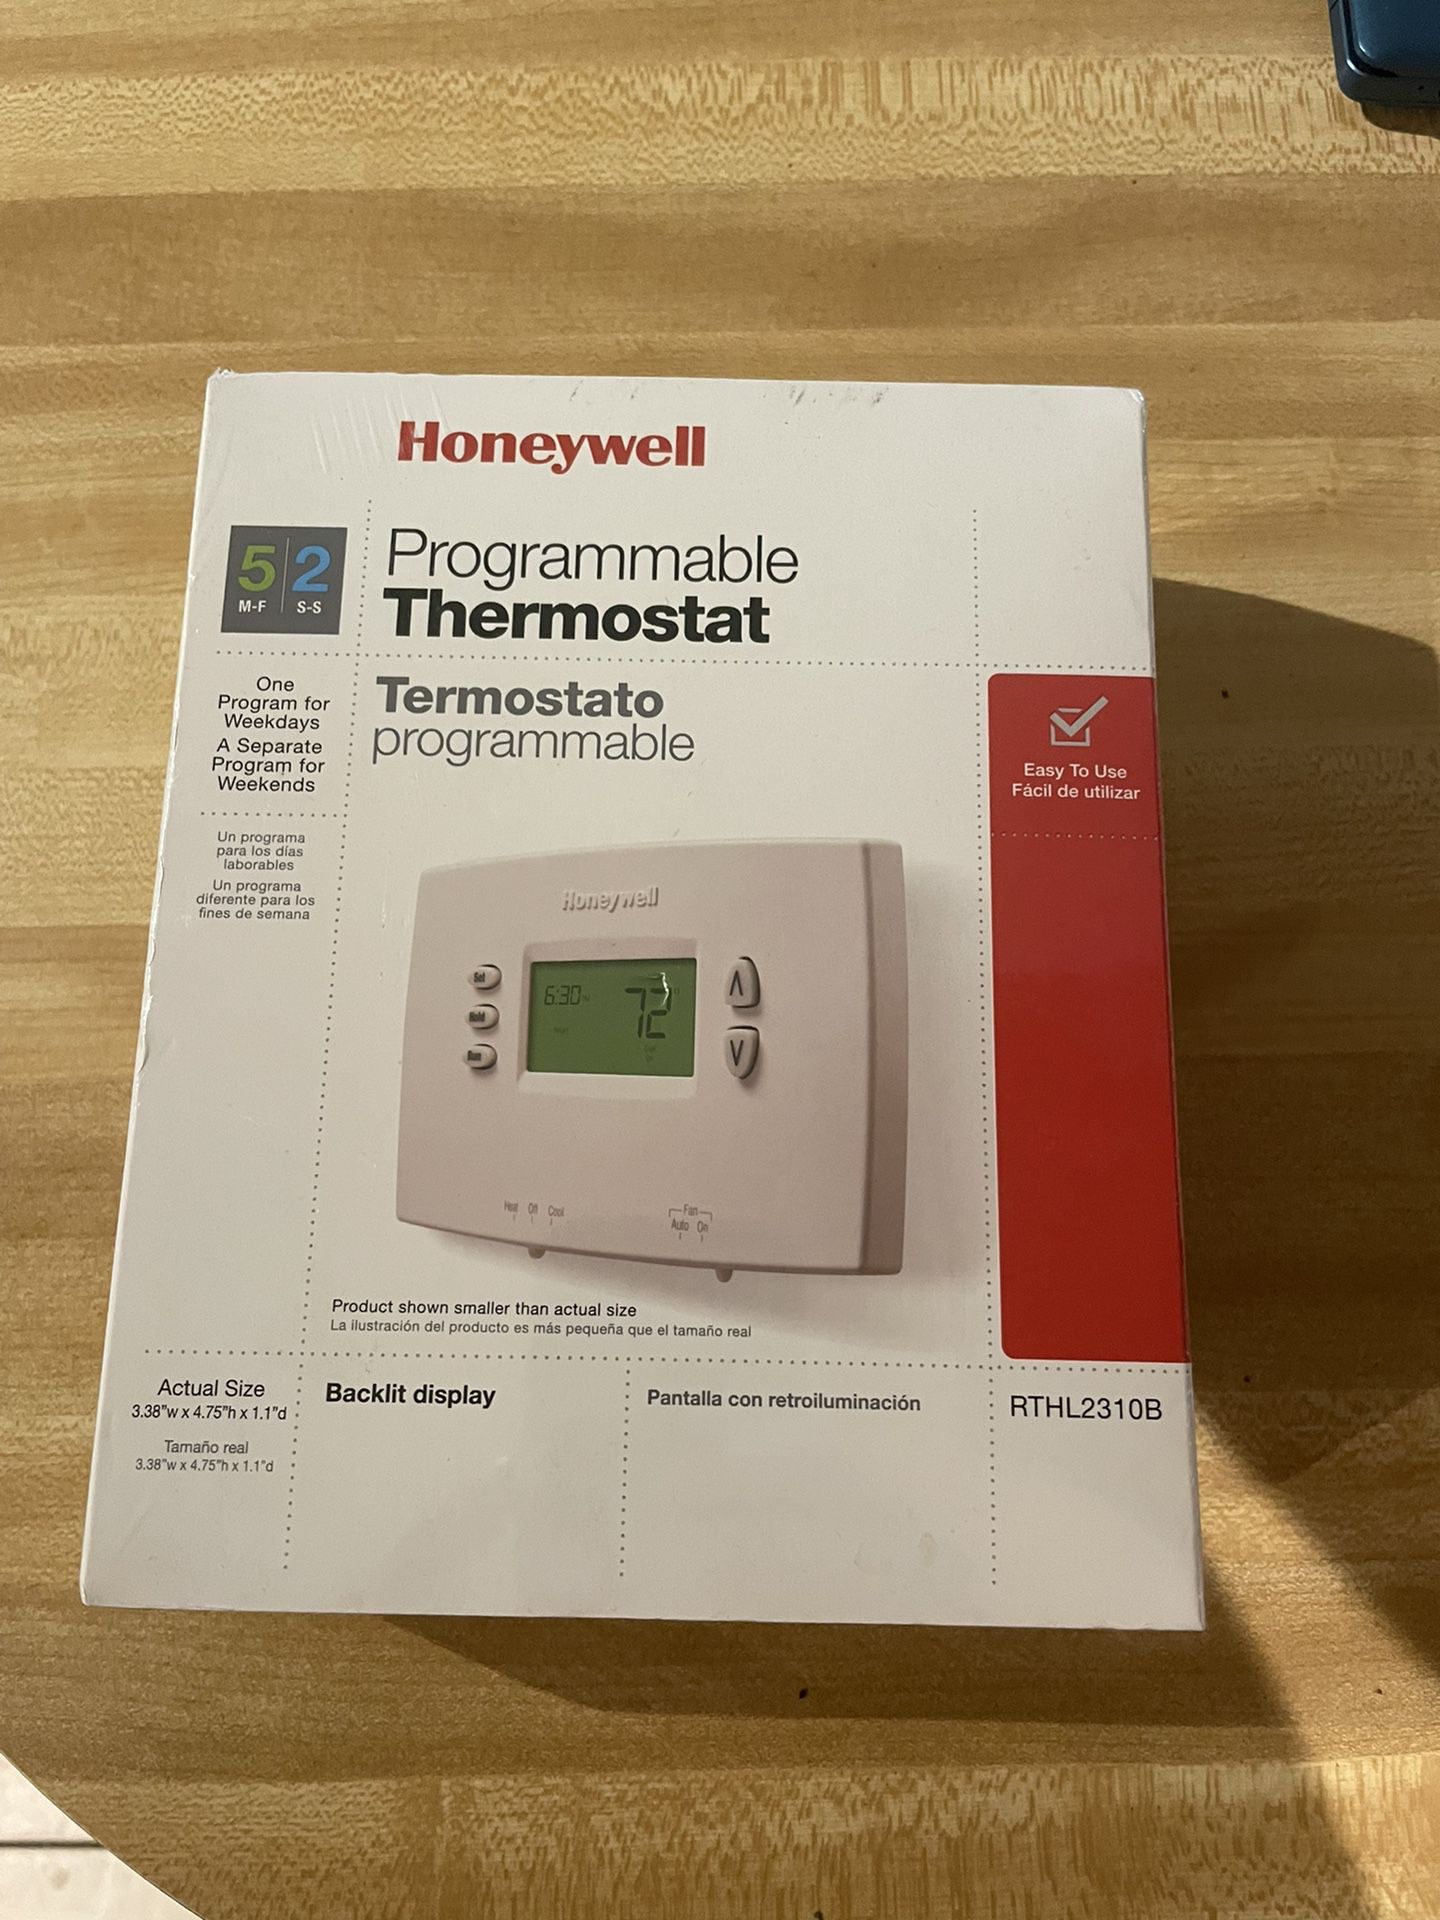 New Programmable thermostat $30 in n Lakeland 